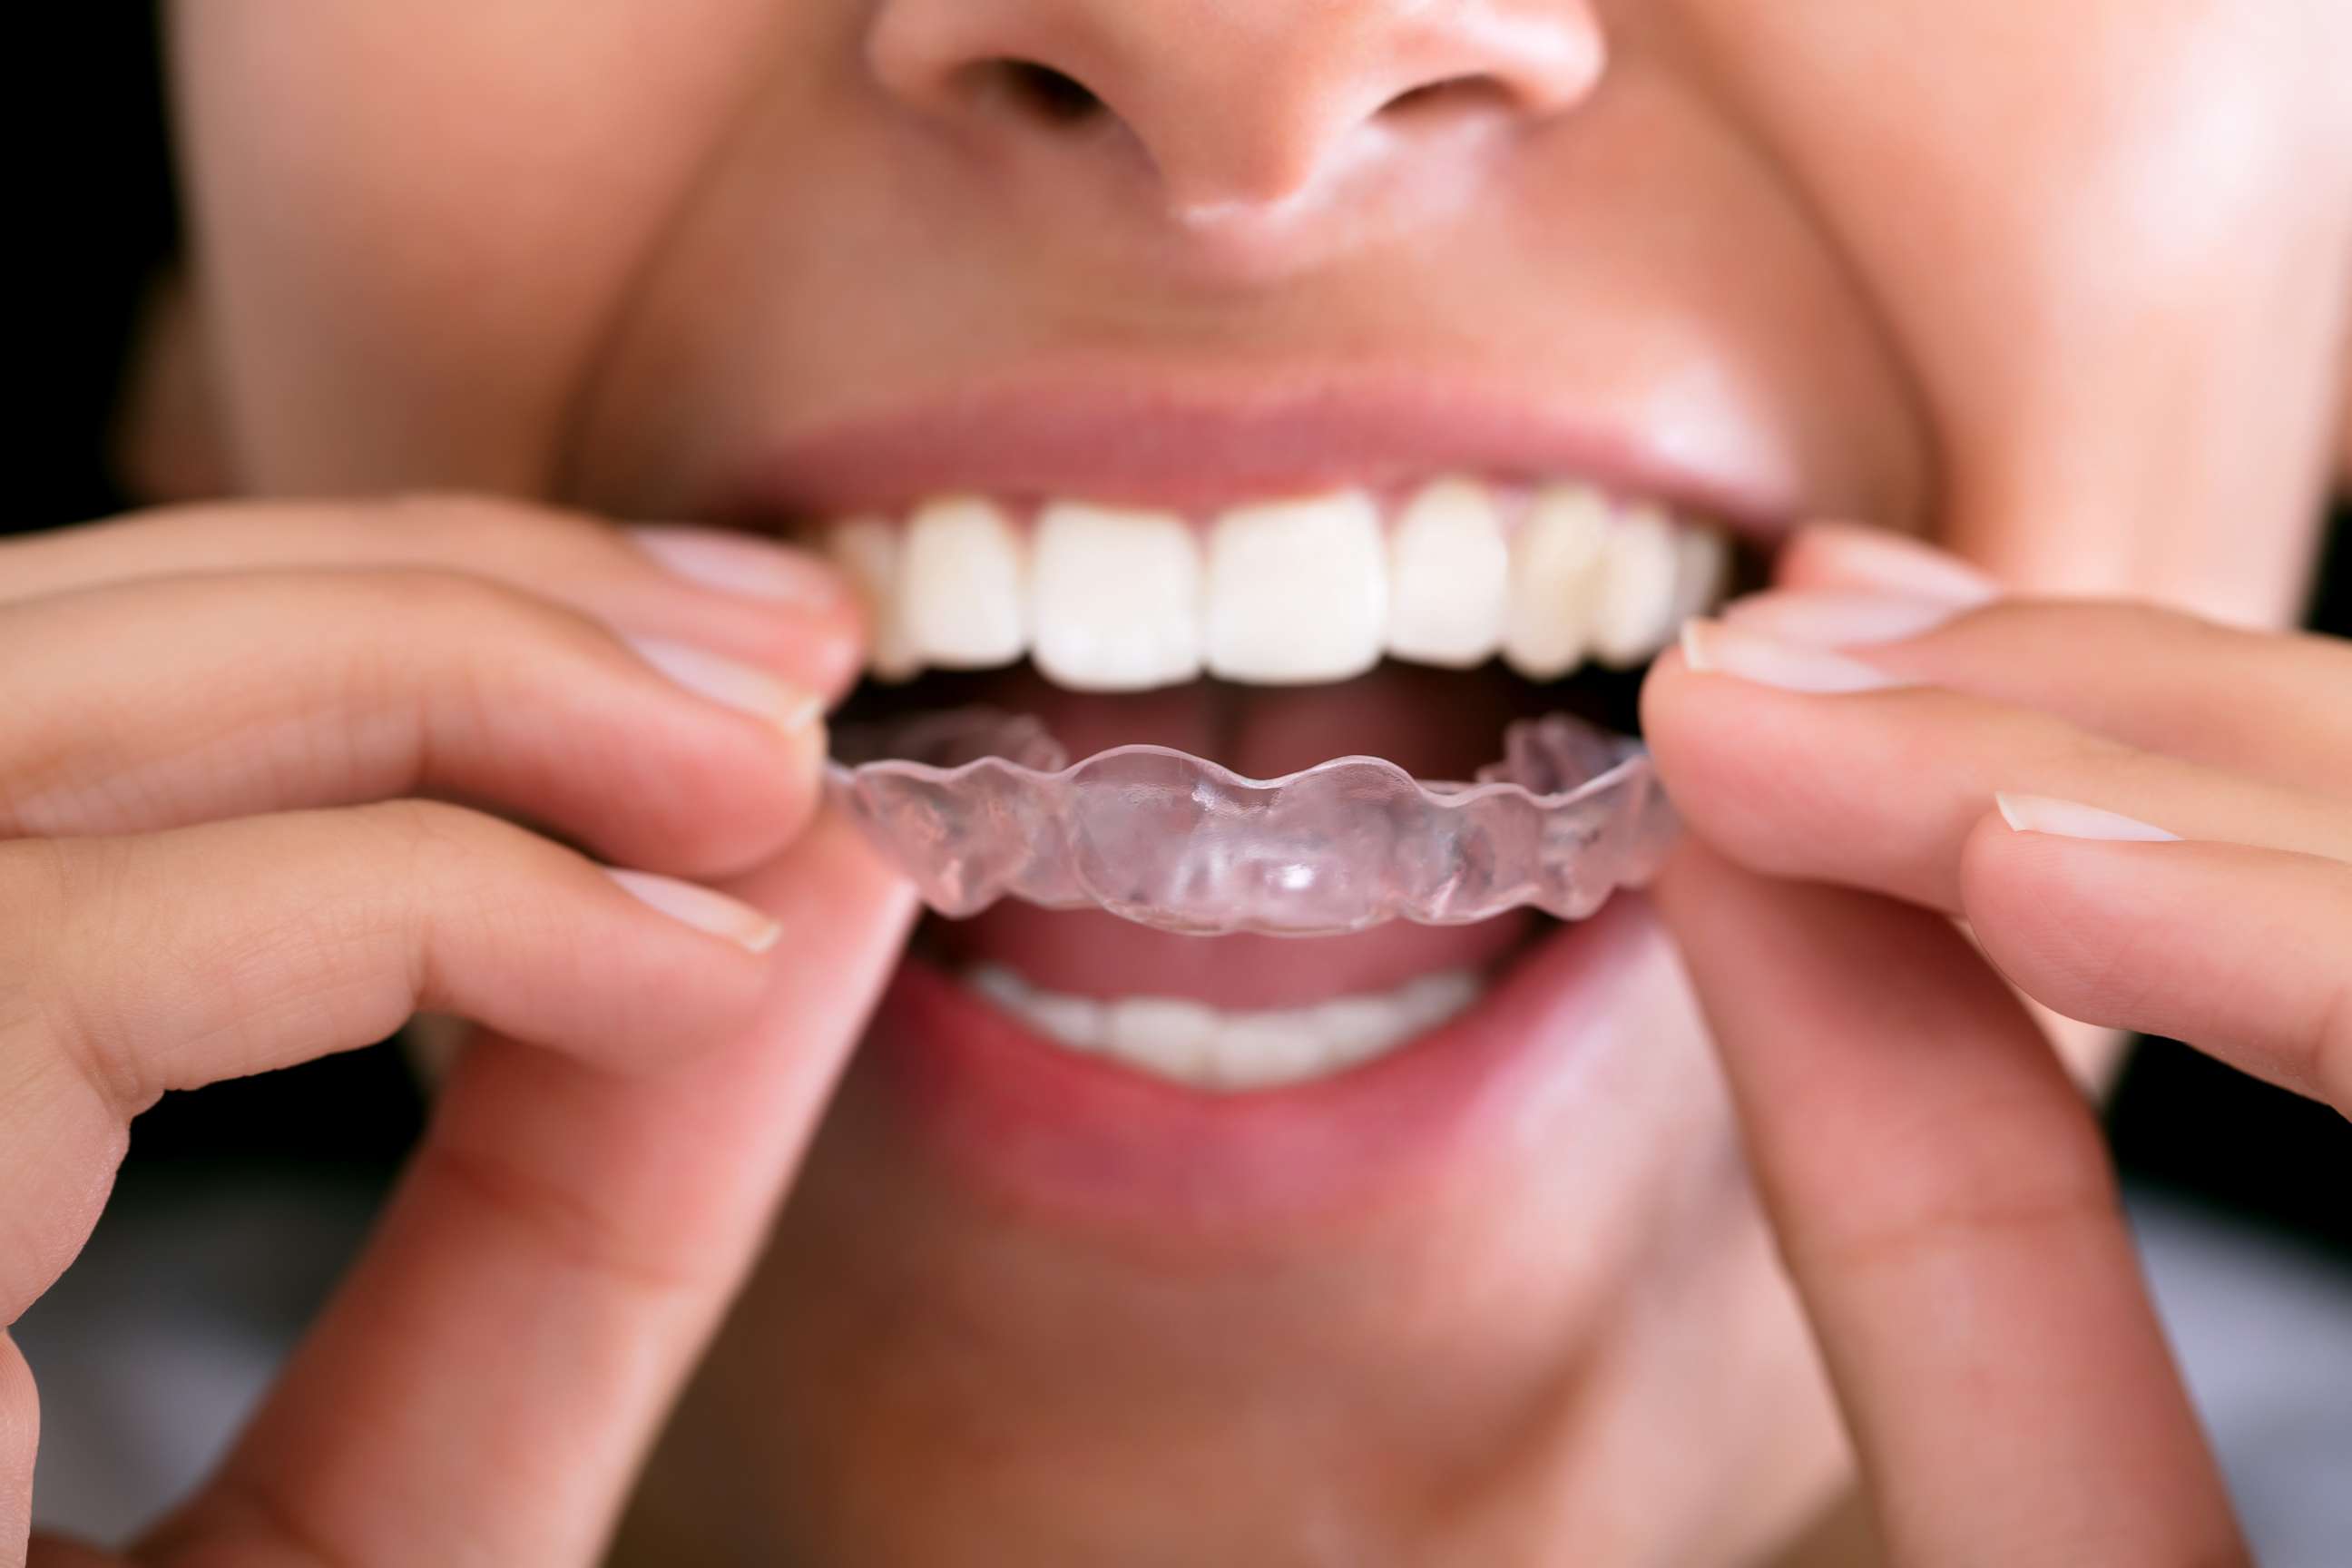 PHOTO: A woman inserts a mouth guard in this stock photo.